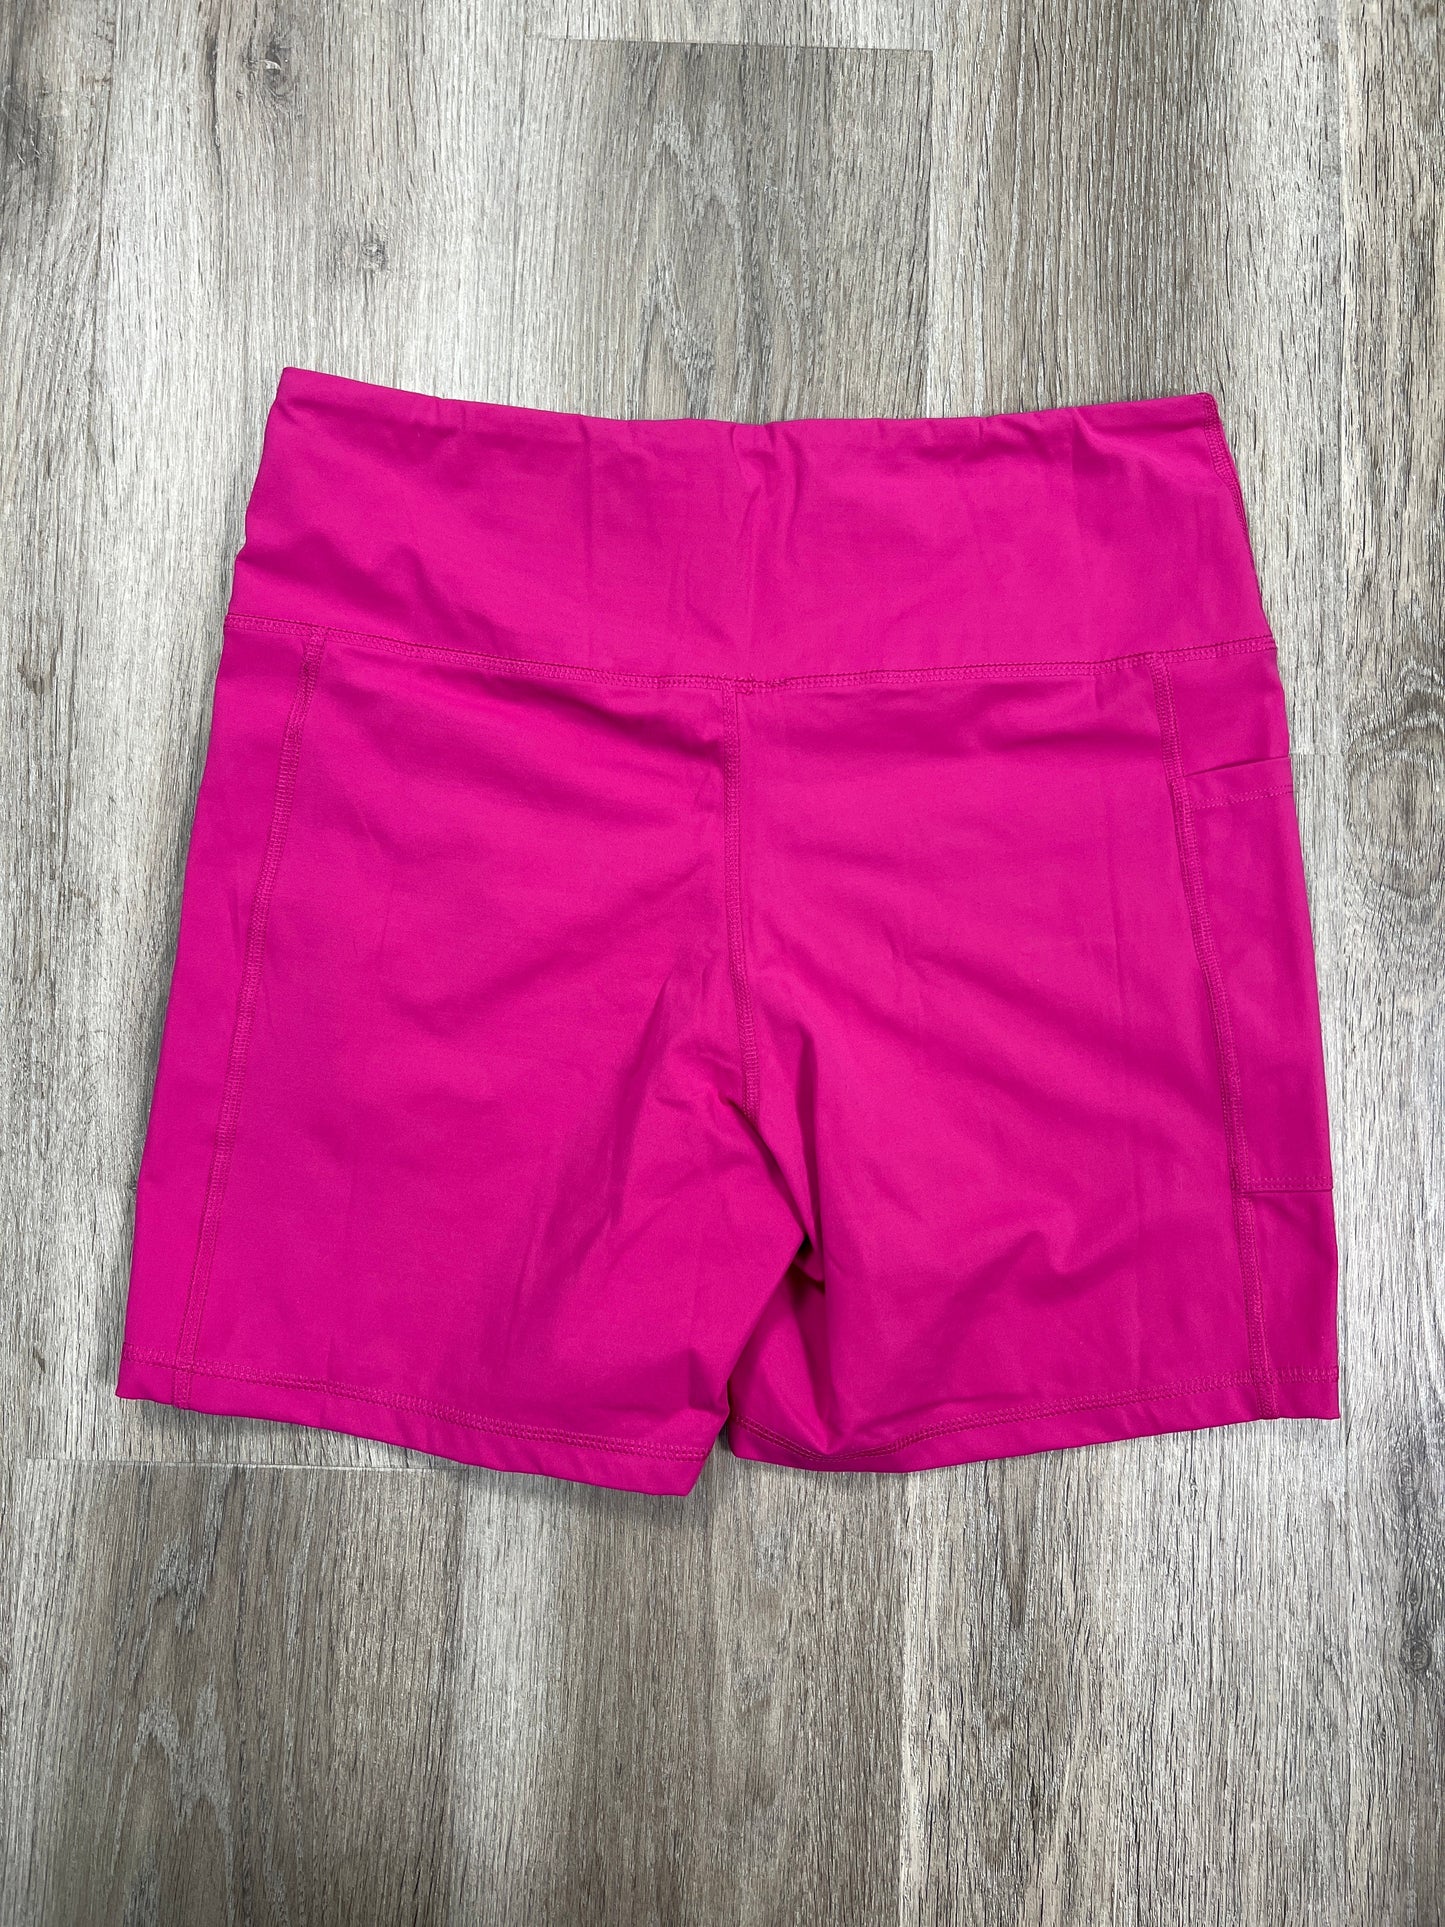 Athletic Shorts By Crave App  Size: L